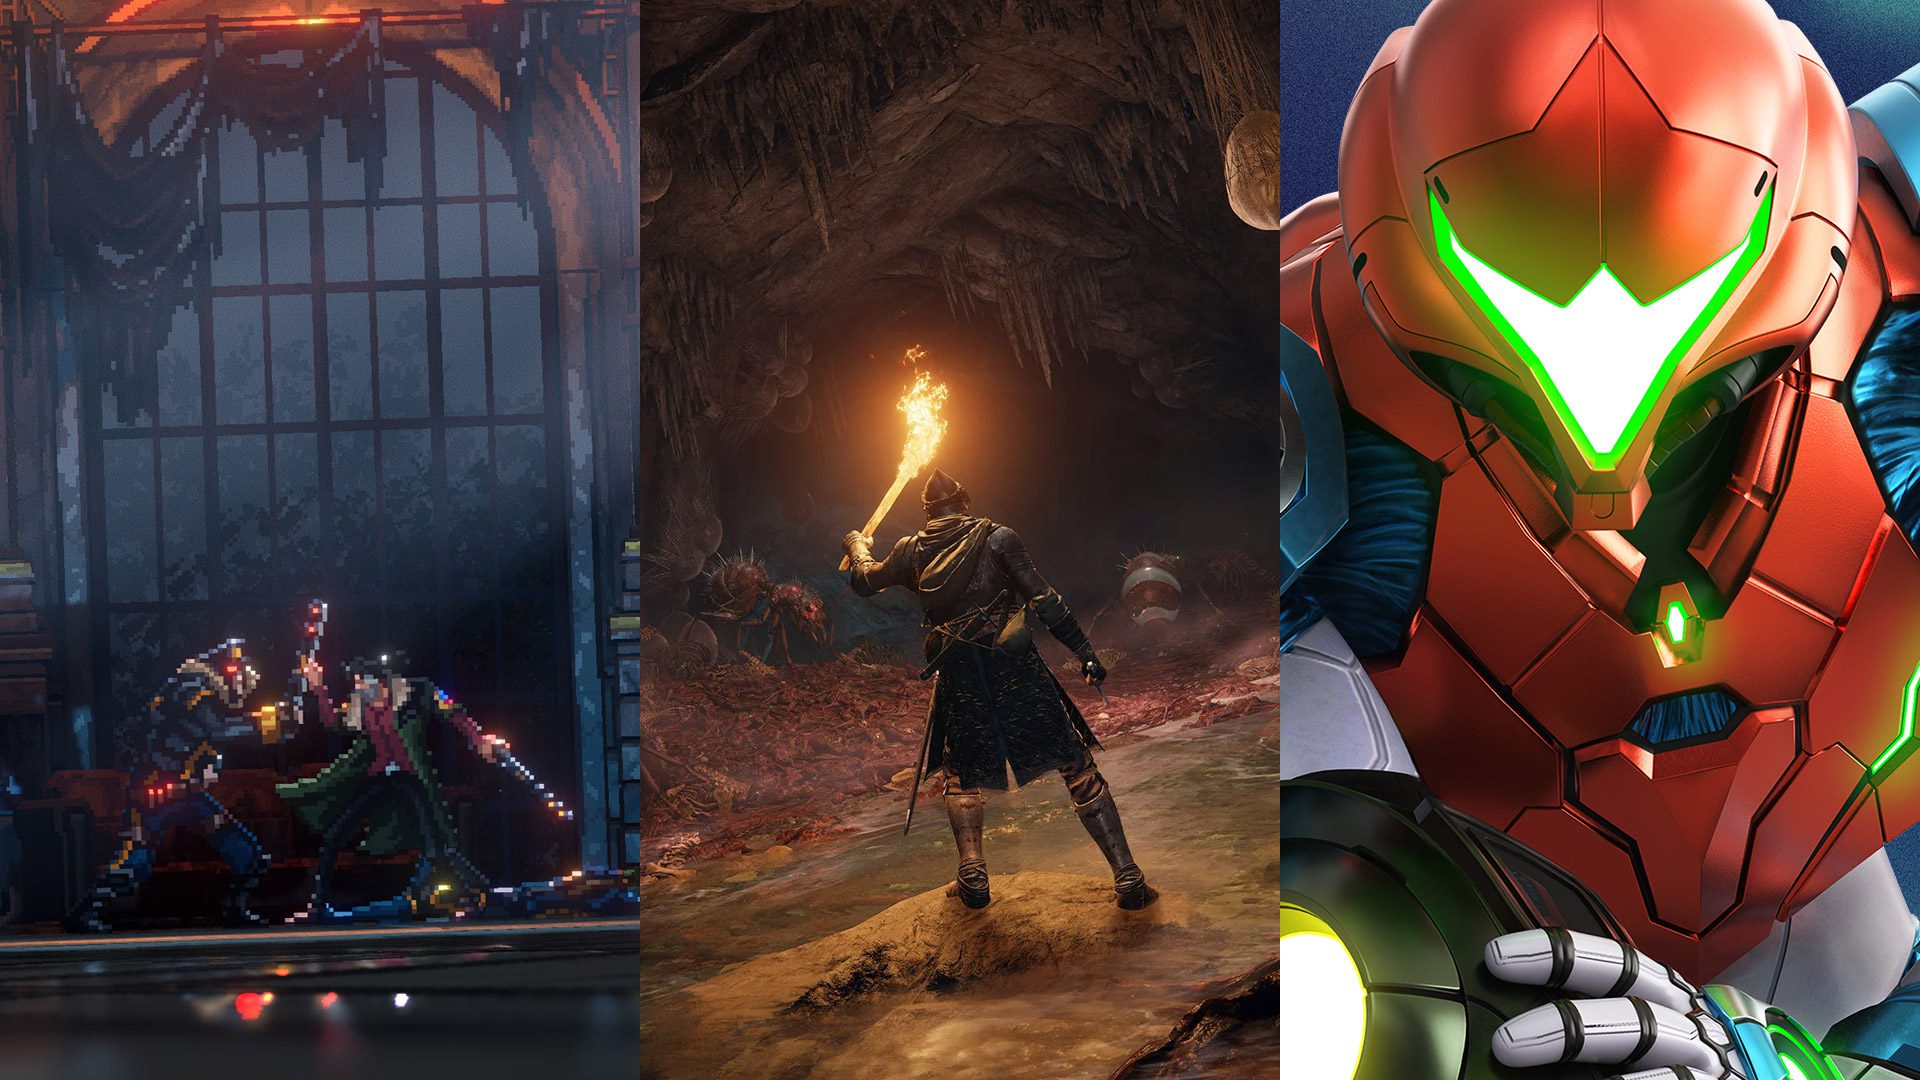 Replaced, Elden Ring, and Metroid Dread were among Destructoid's favorite games at E3 2021